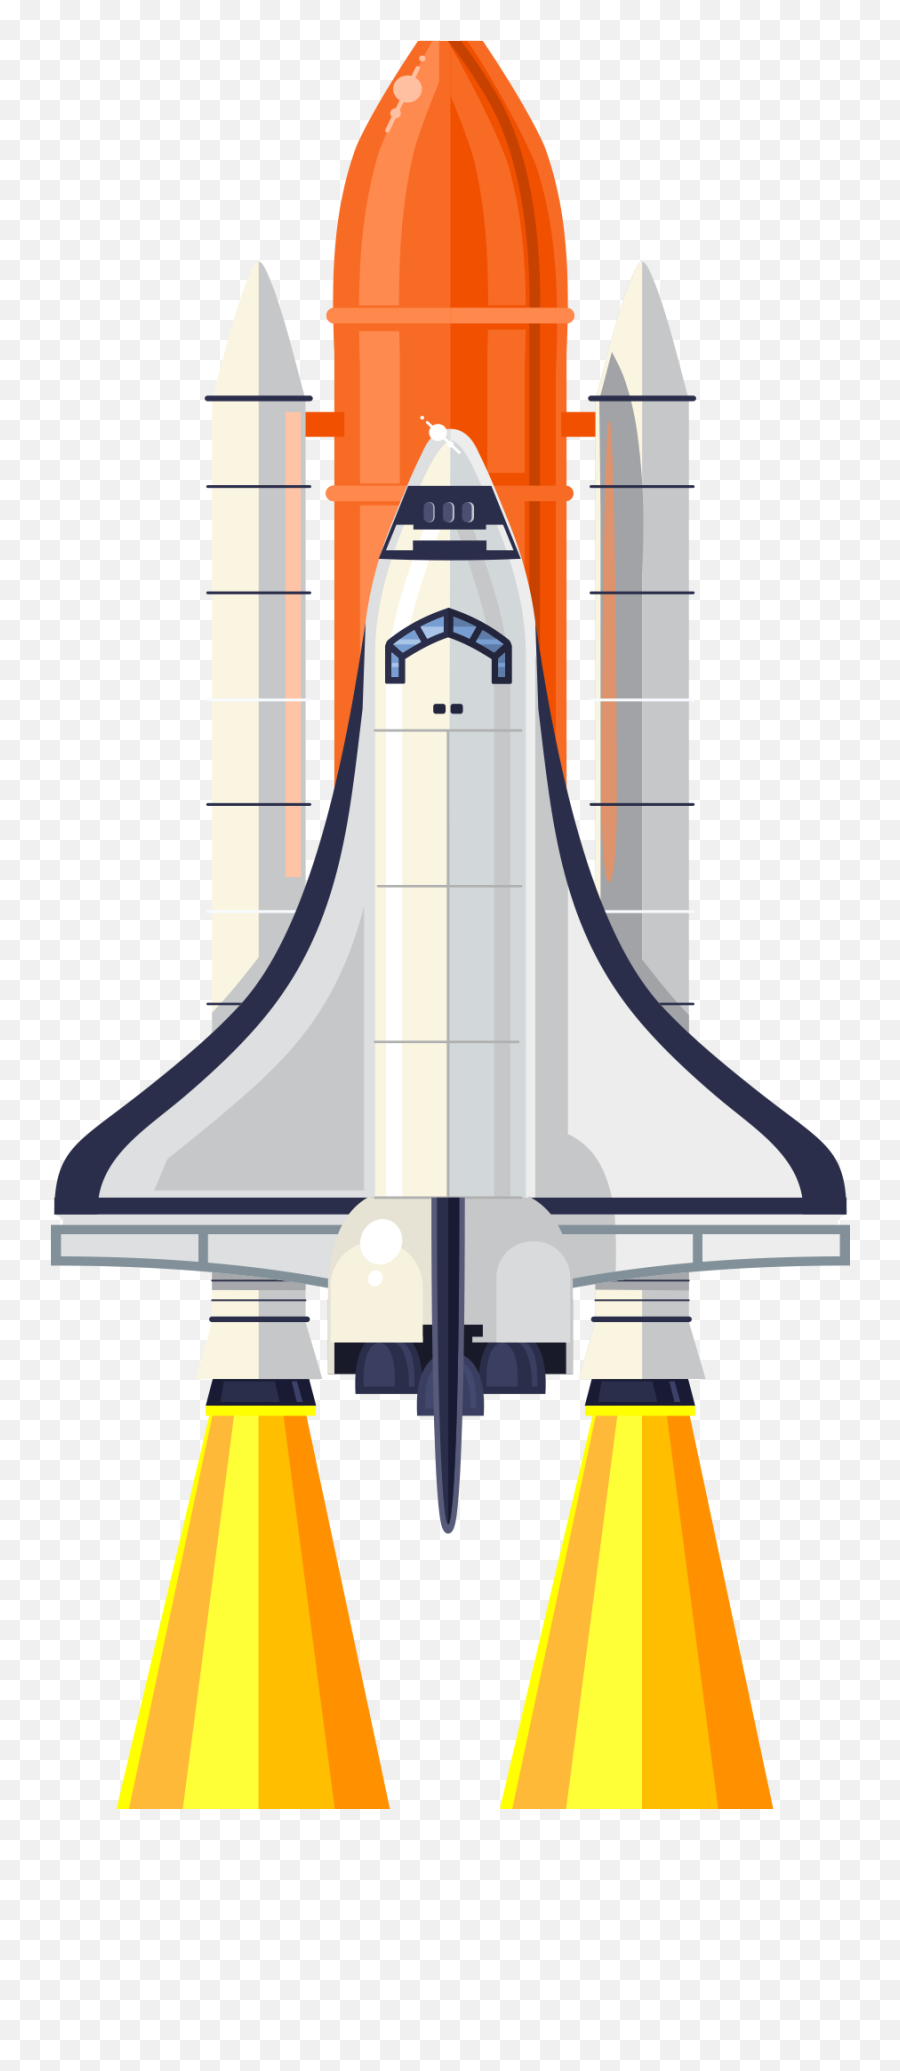 Rocket Clipart Png Image Free Download - Space Rocket Png,Rocket Clipart Png